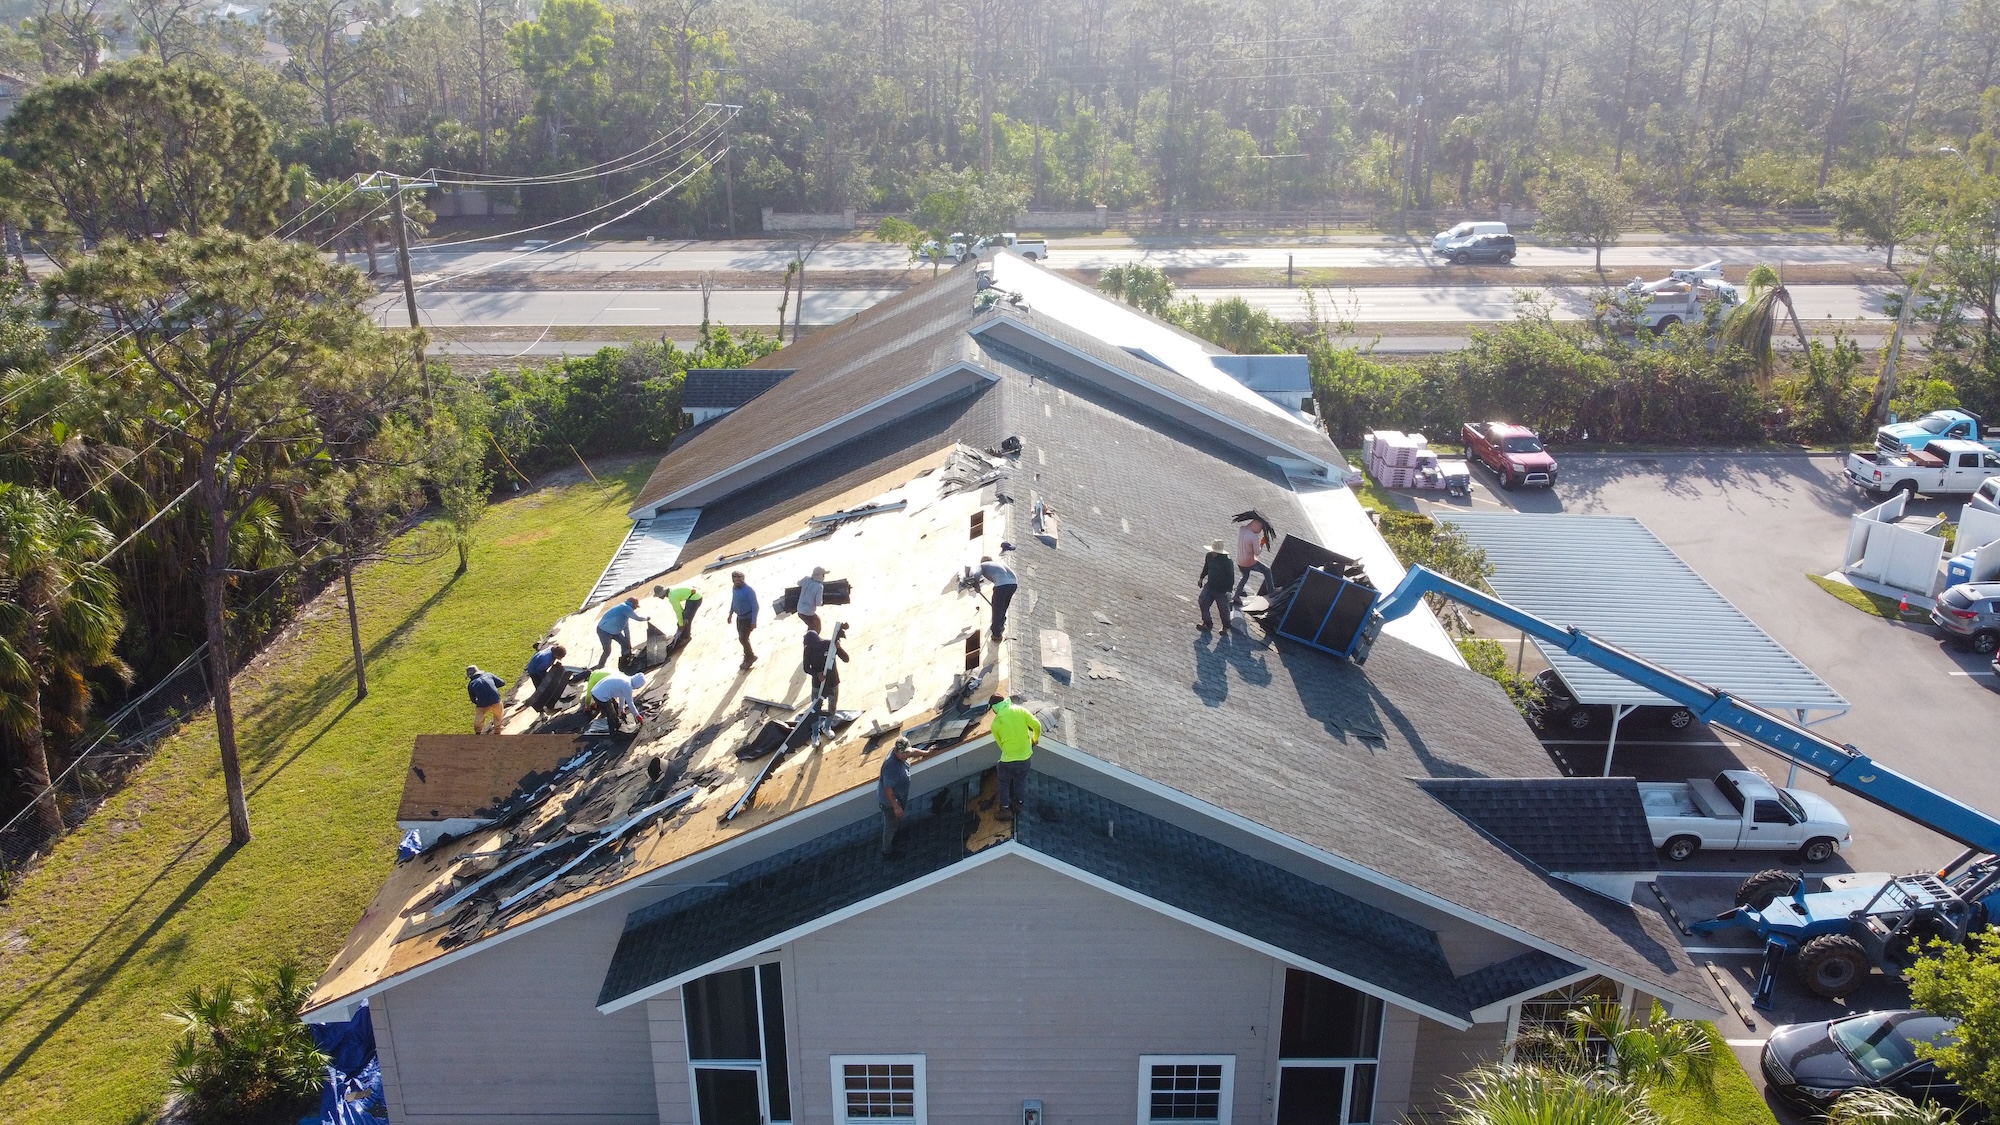 Aerial view of multiple workers repairing a damaged roof on a residential building, with debris around, in Fort Myers, FL, after Hurricane Ian.